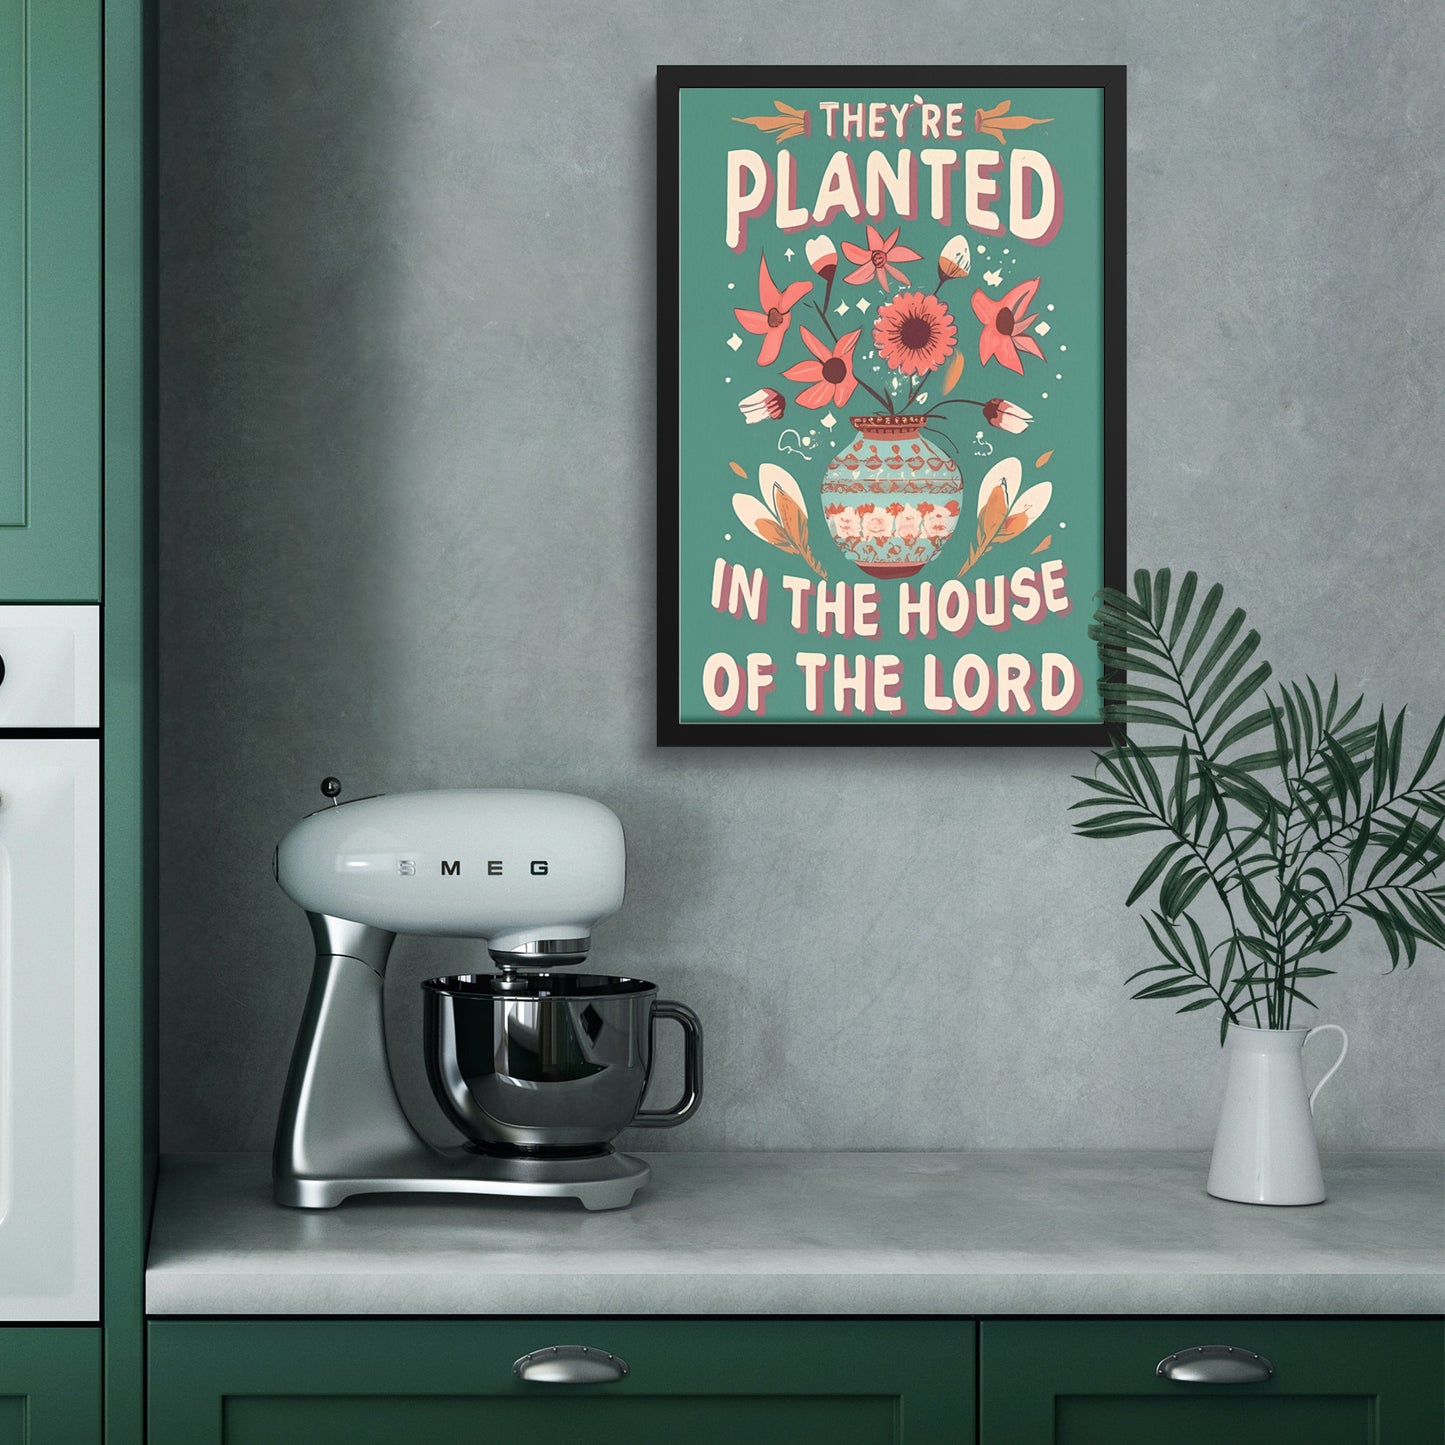 Planted in the House of the Lord Retro Framed Poster